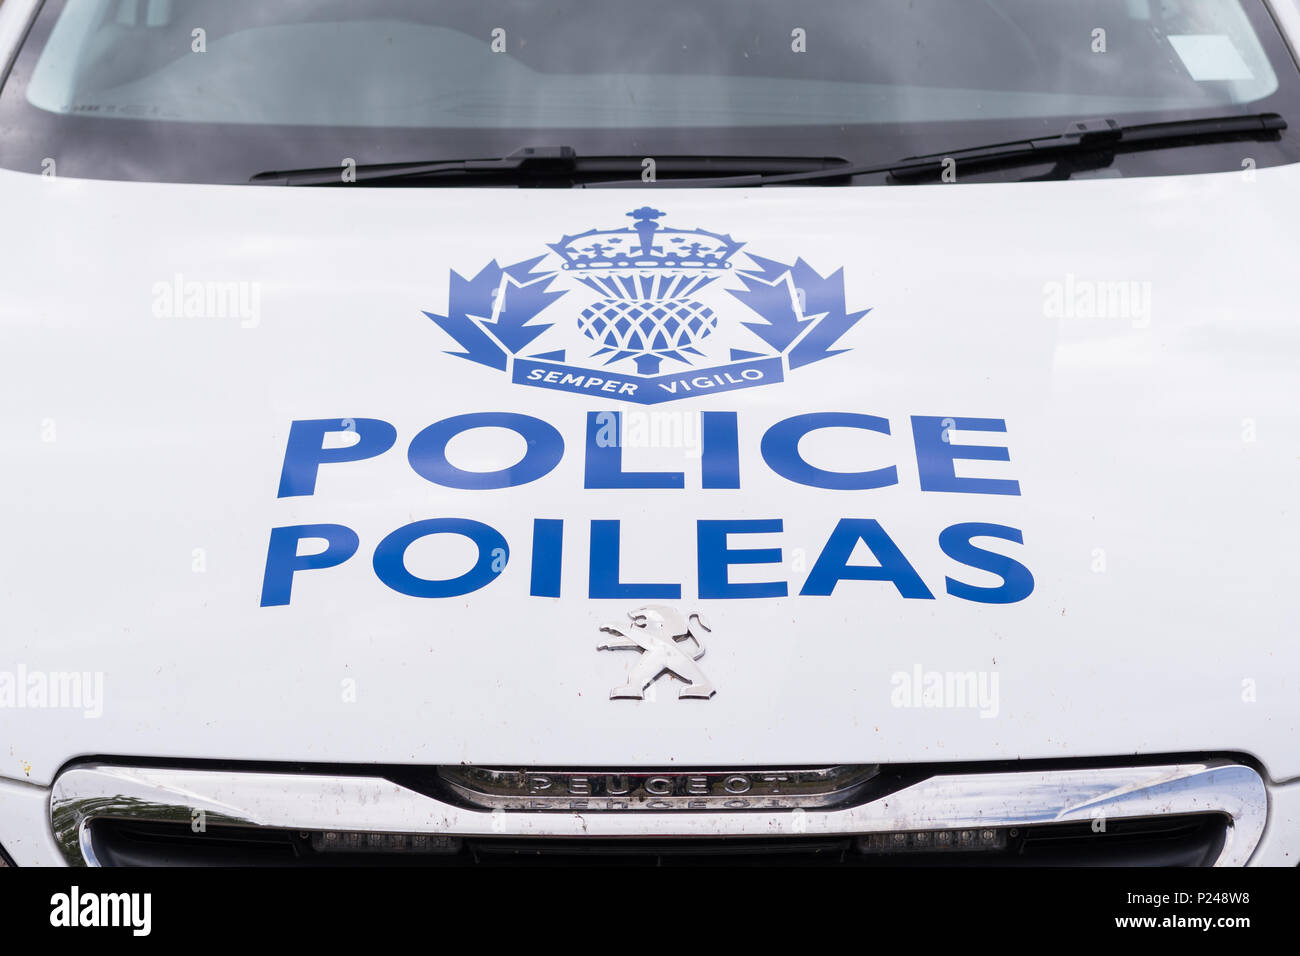 Police Scotland police car and logo with name in Gaelic - Poileas Stock Photo